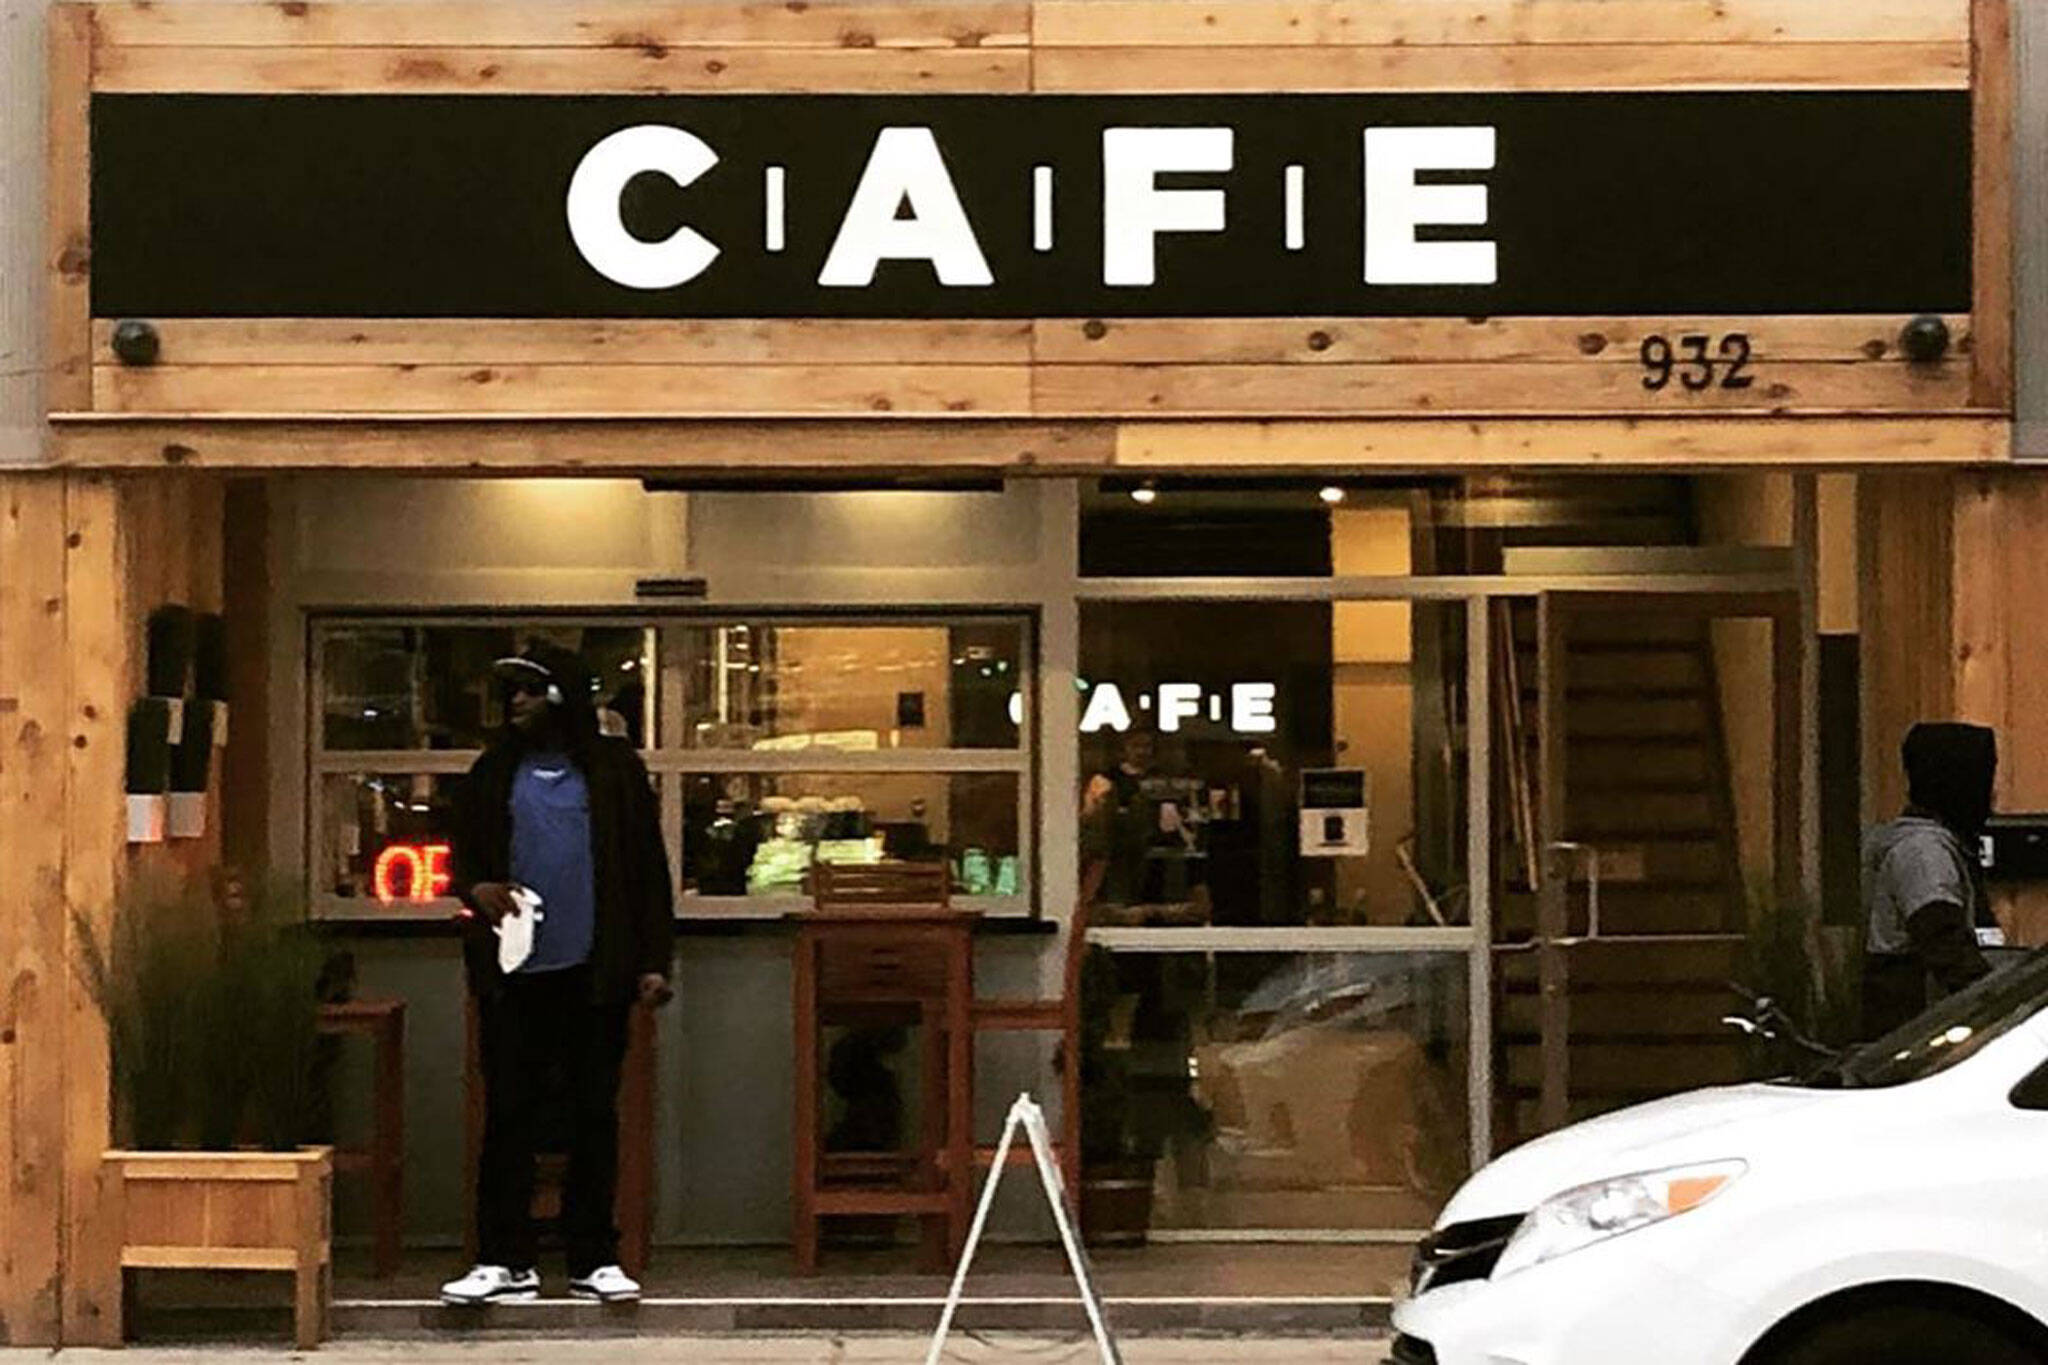 Toronto Cannabis Store Cafe Confronted With Allegations Of Racism But Owner Denies It